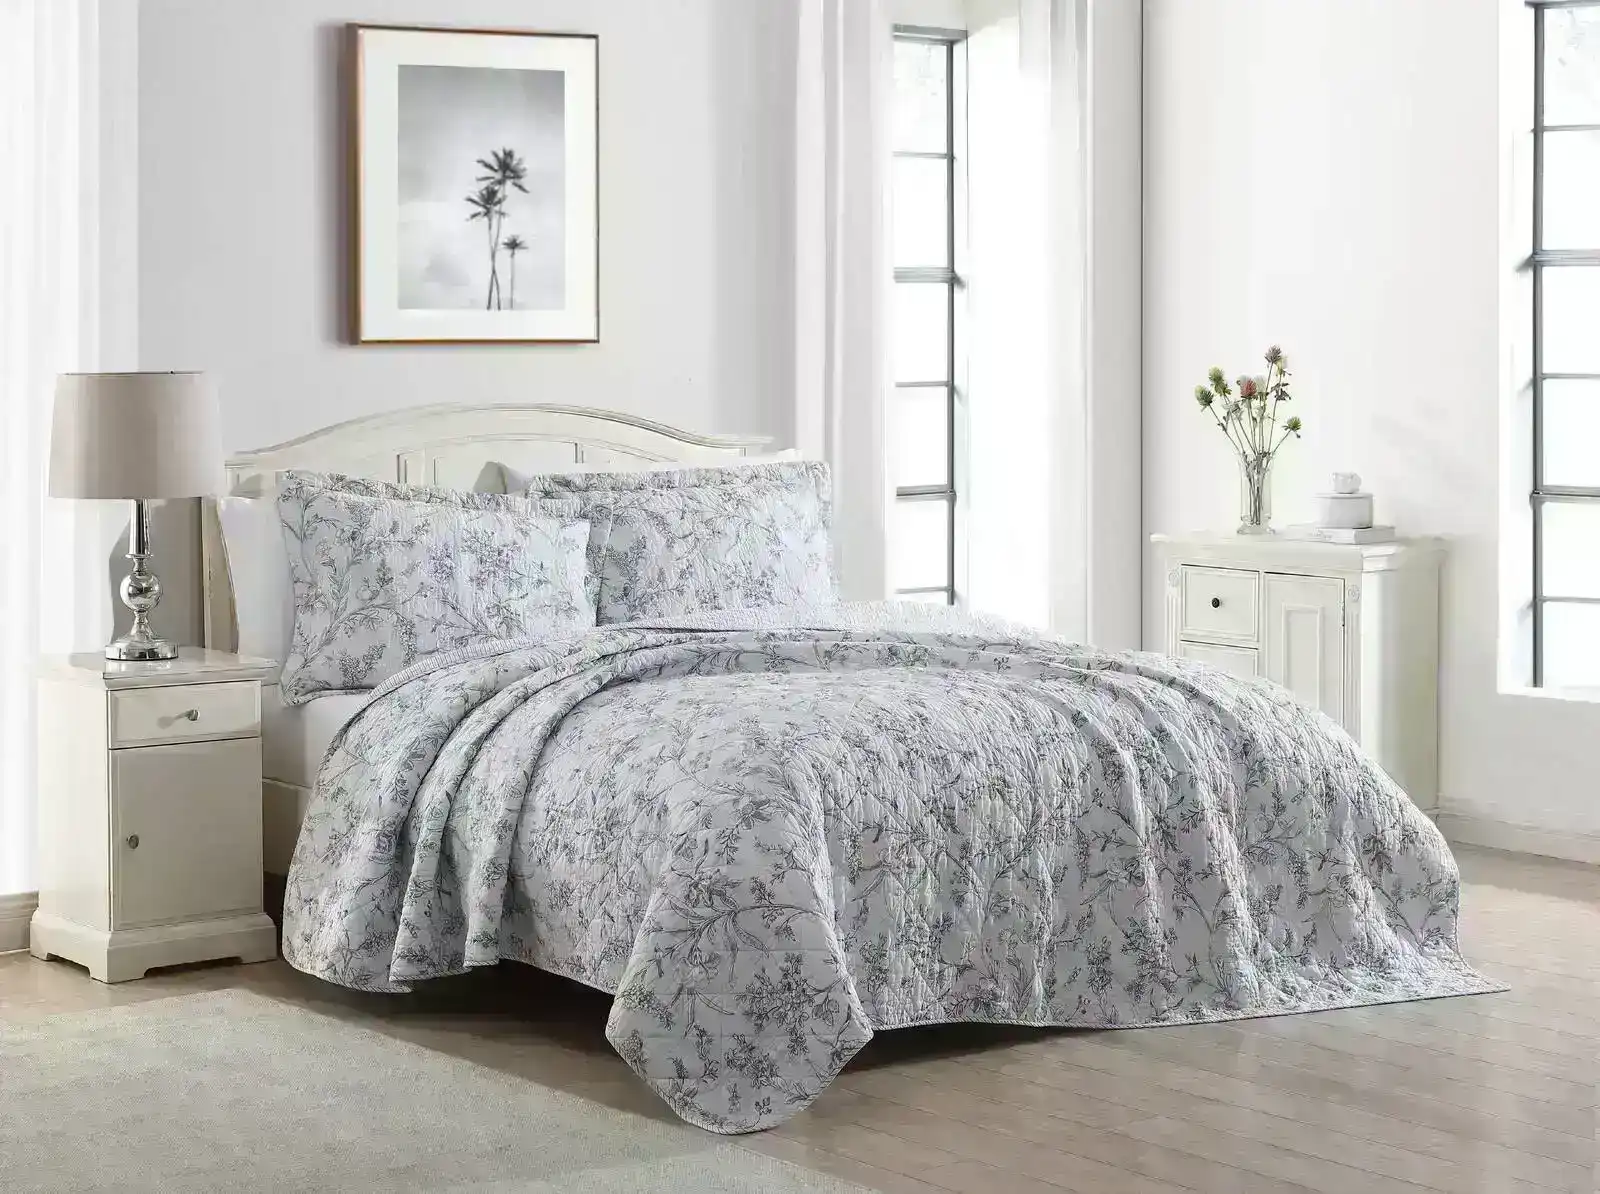 Laura Ashley Queen/King Bed Branch Toile Coverlet w/ 2x Pillowcases Set Grey